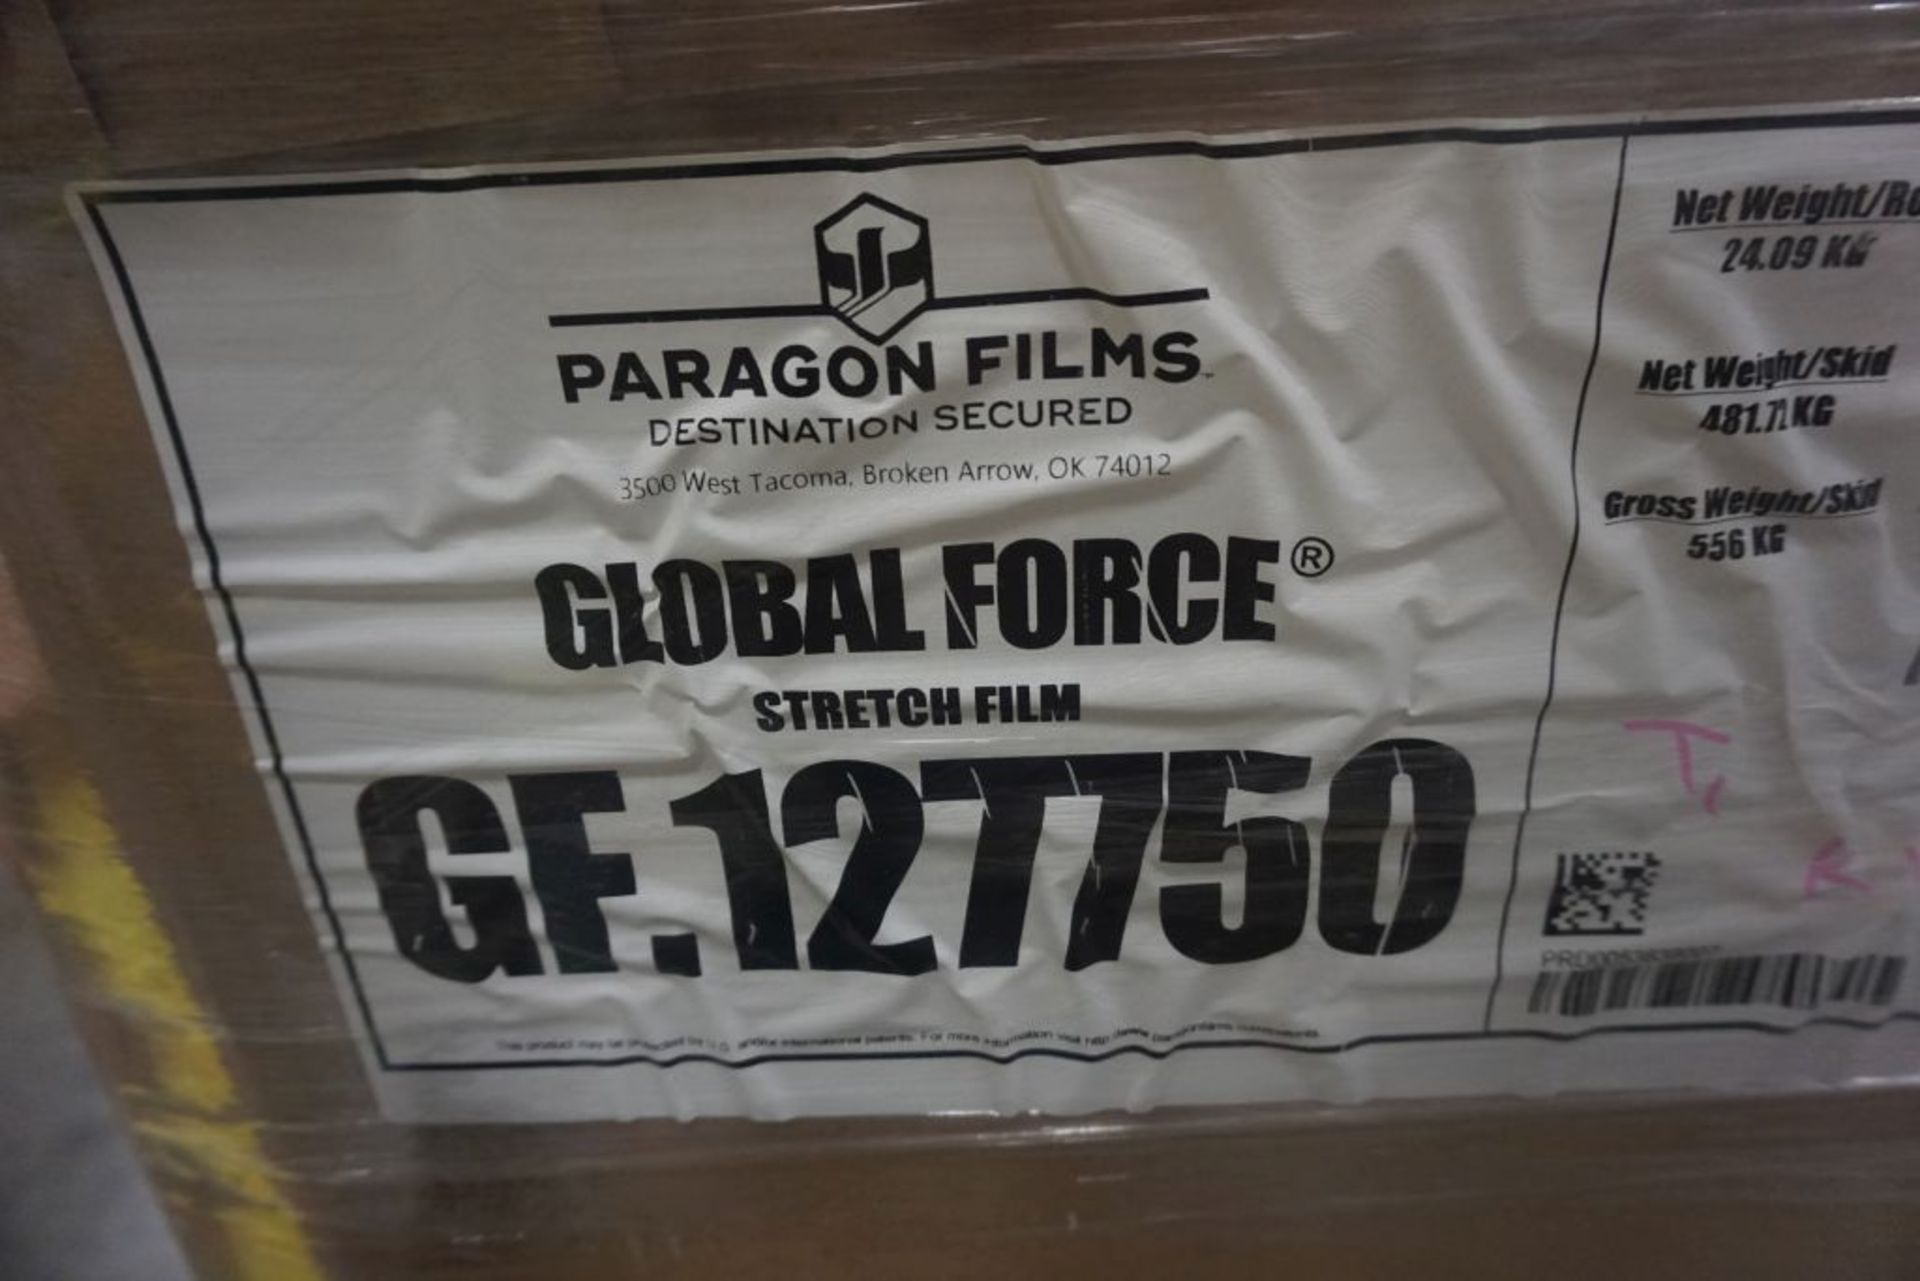 Lot of (20) Rolls of Global Force Stretch Wrap - GF 127750; Tag: 218190; Lot Loading Fee: $30 - Image 4 of 5